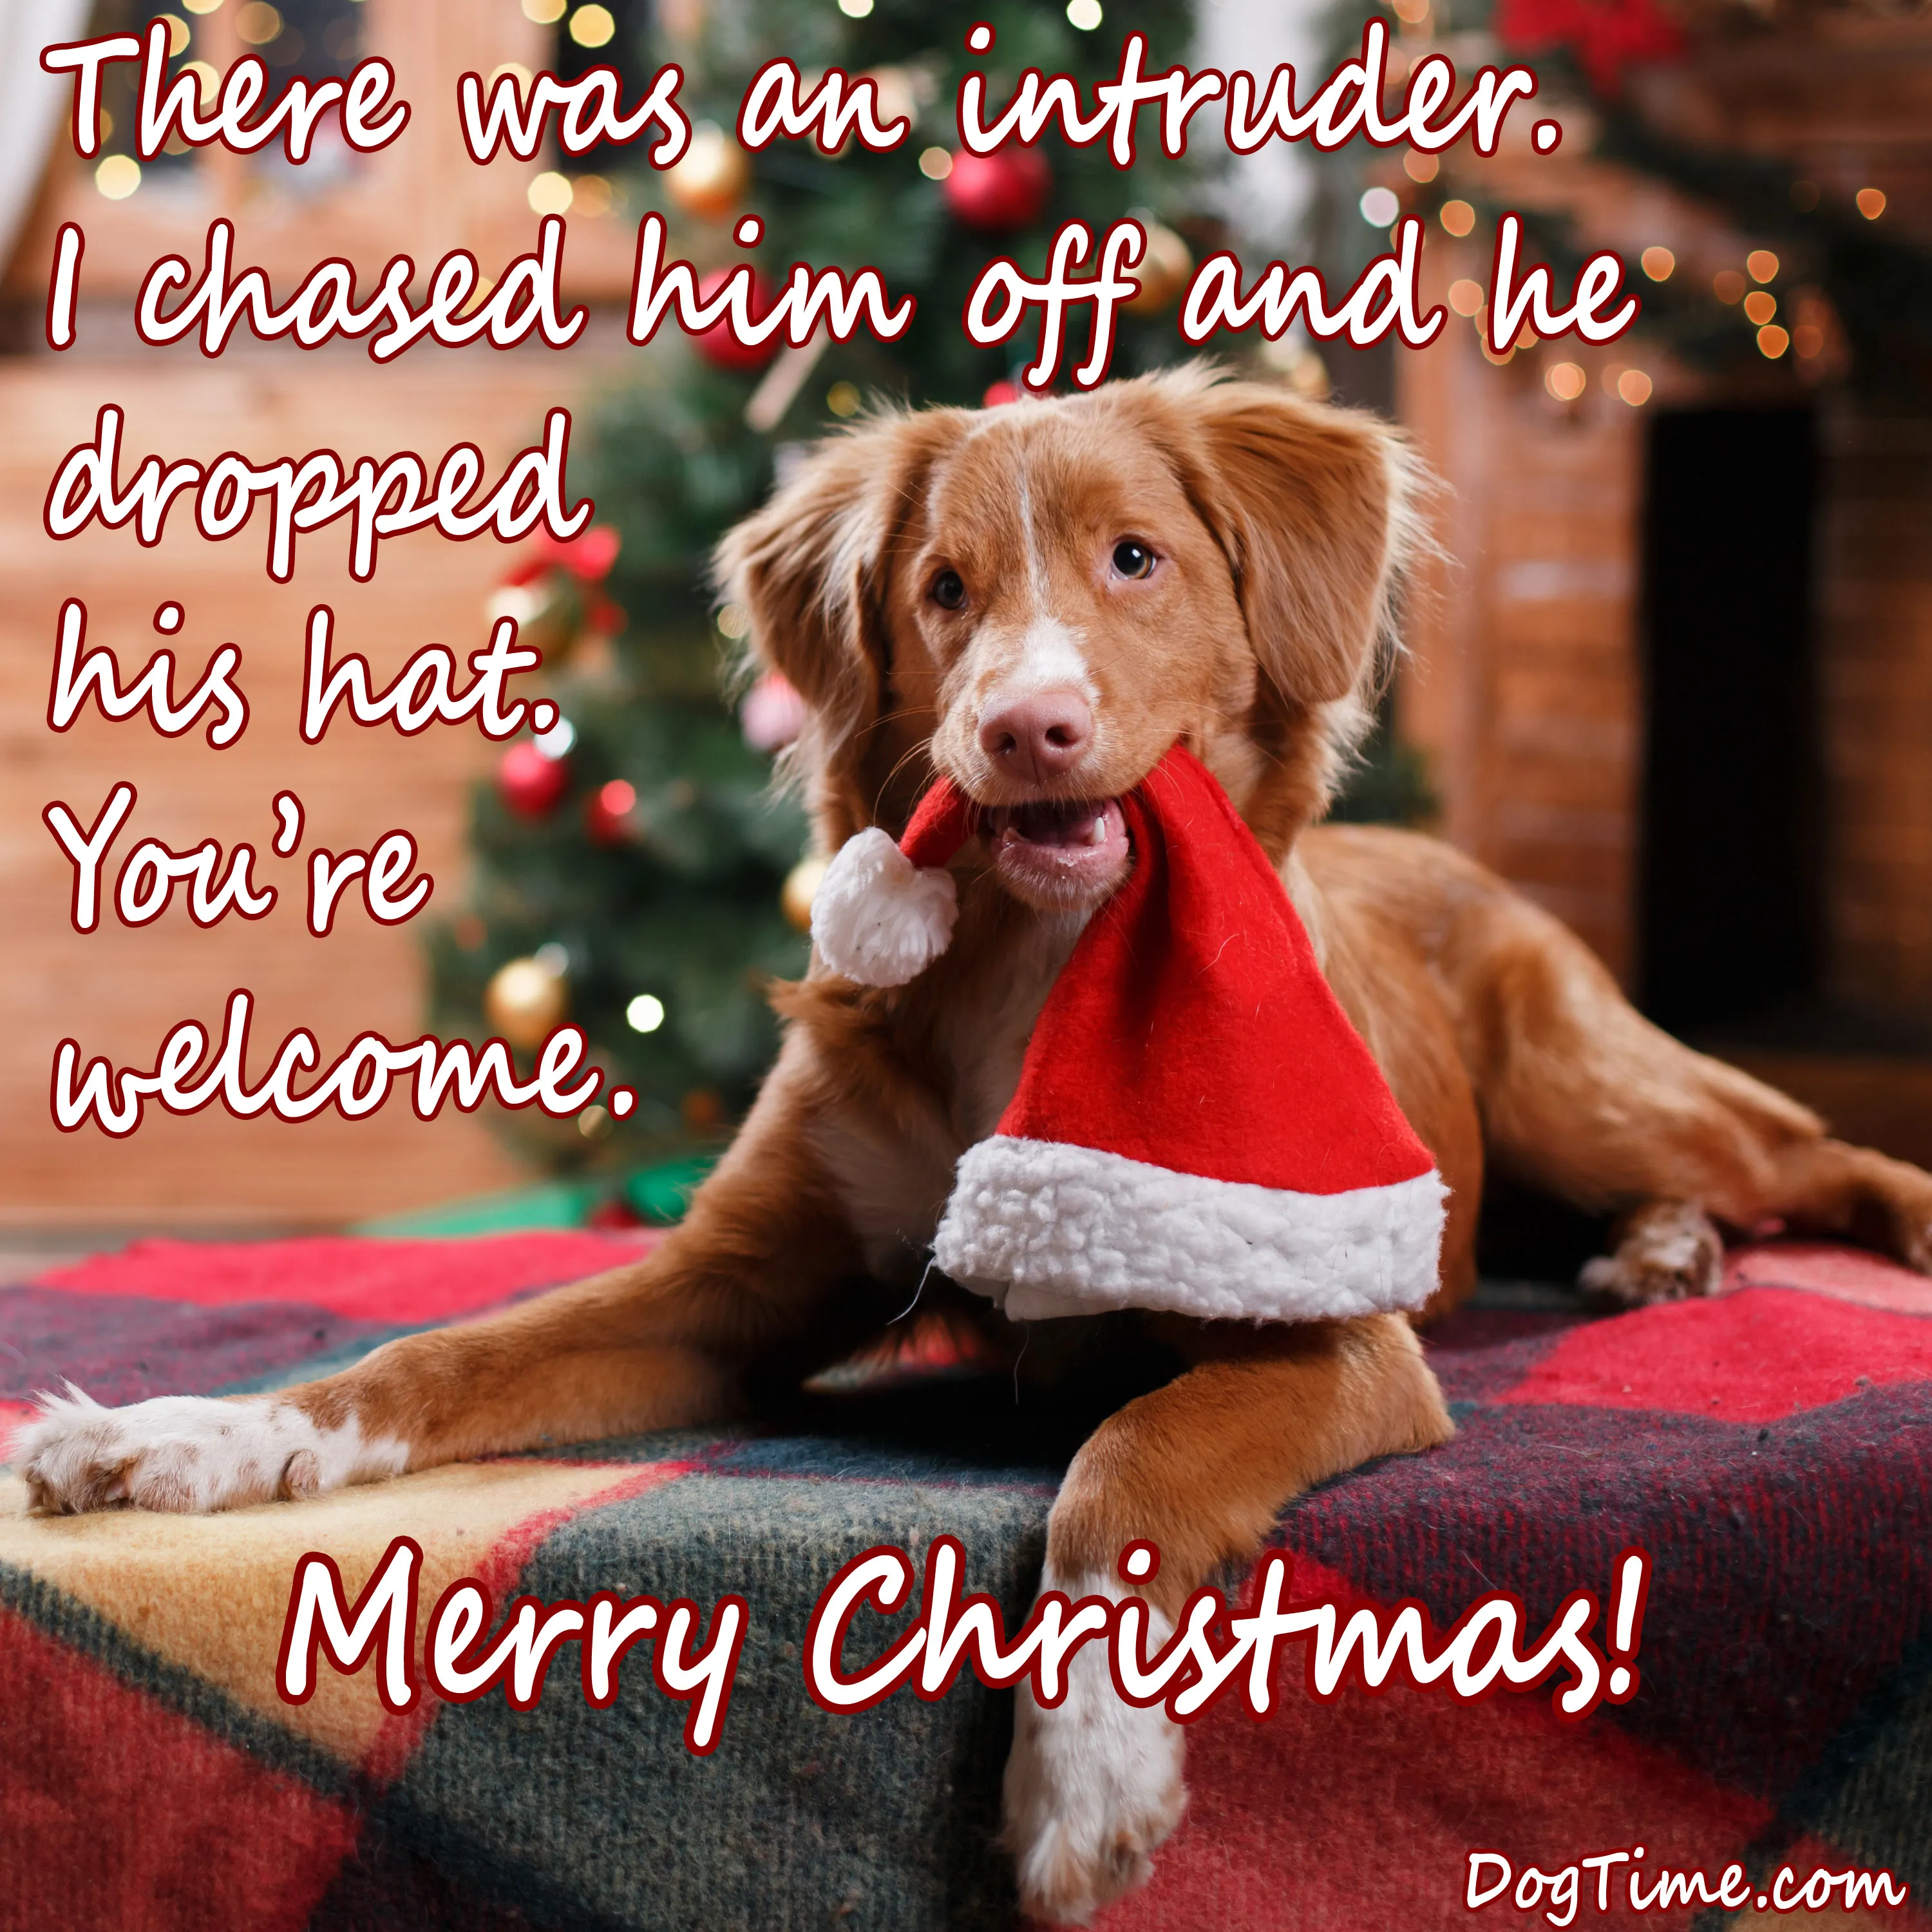 30 Dog Christmas E-Cards To Share With Your Friends And Family - DogTime